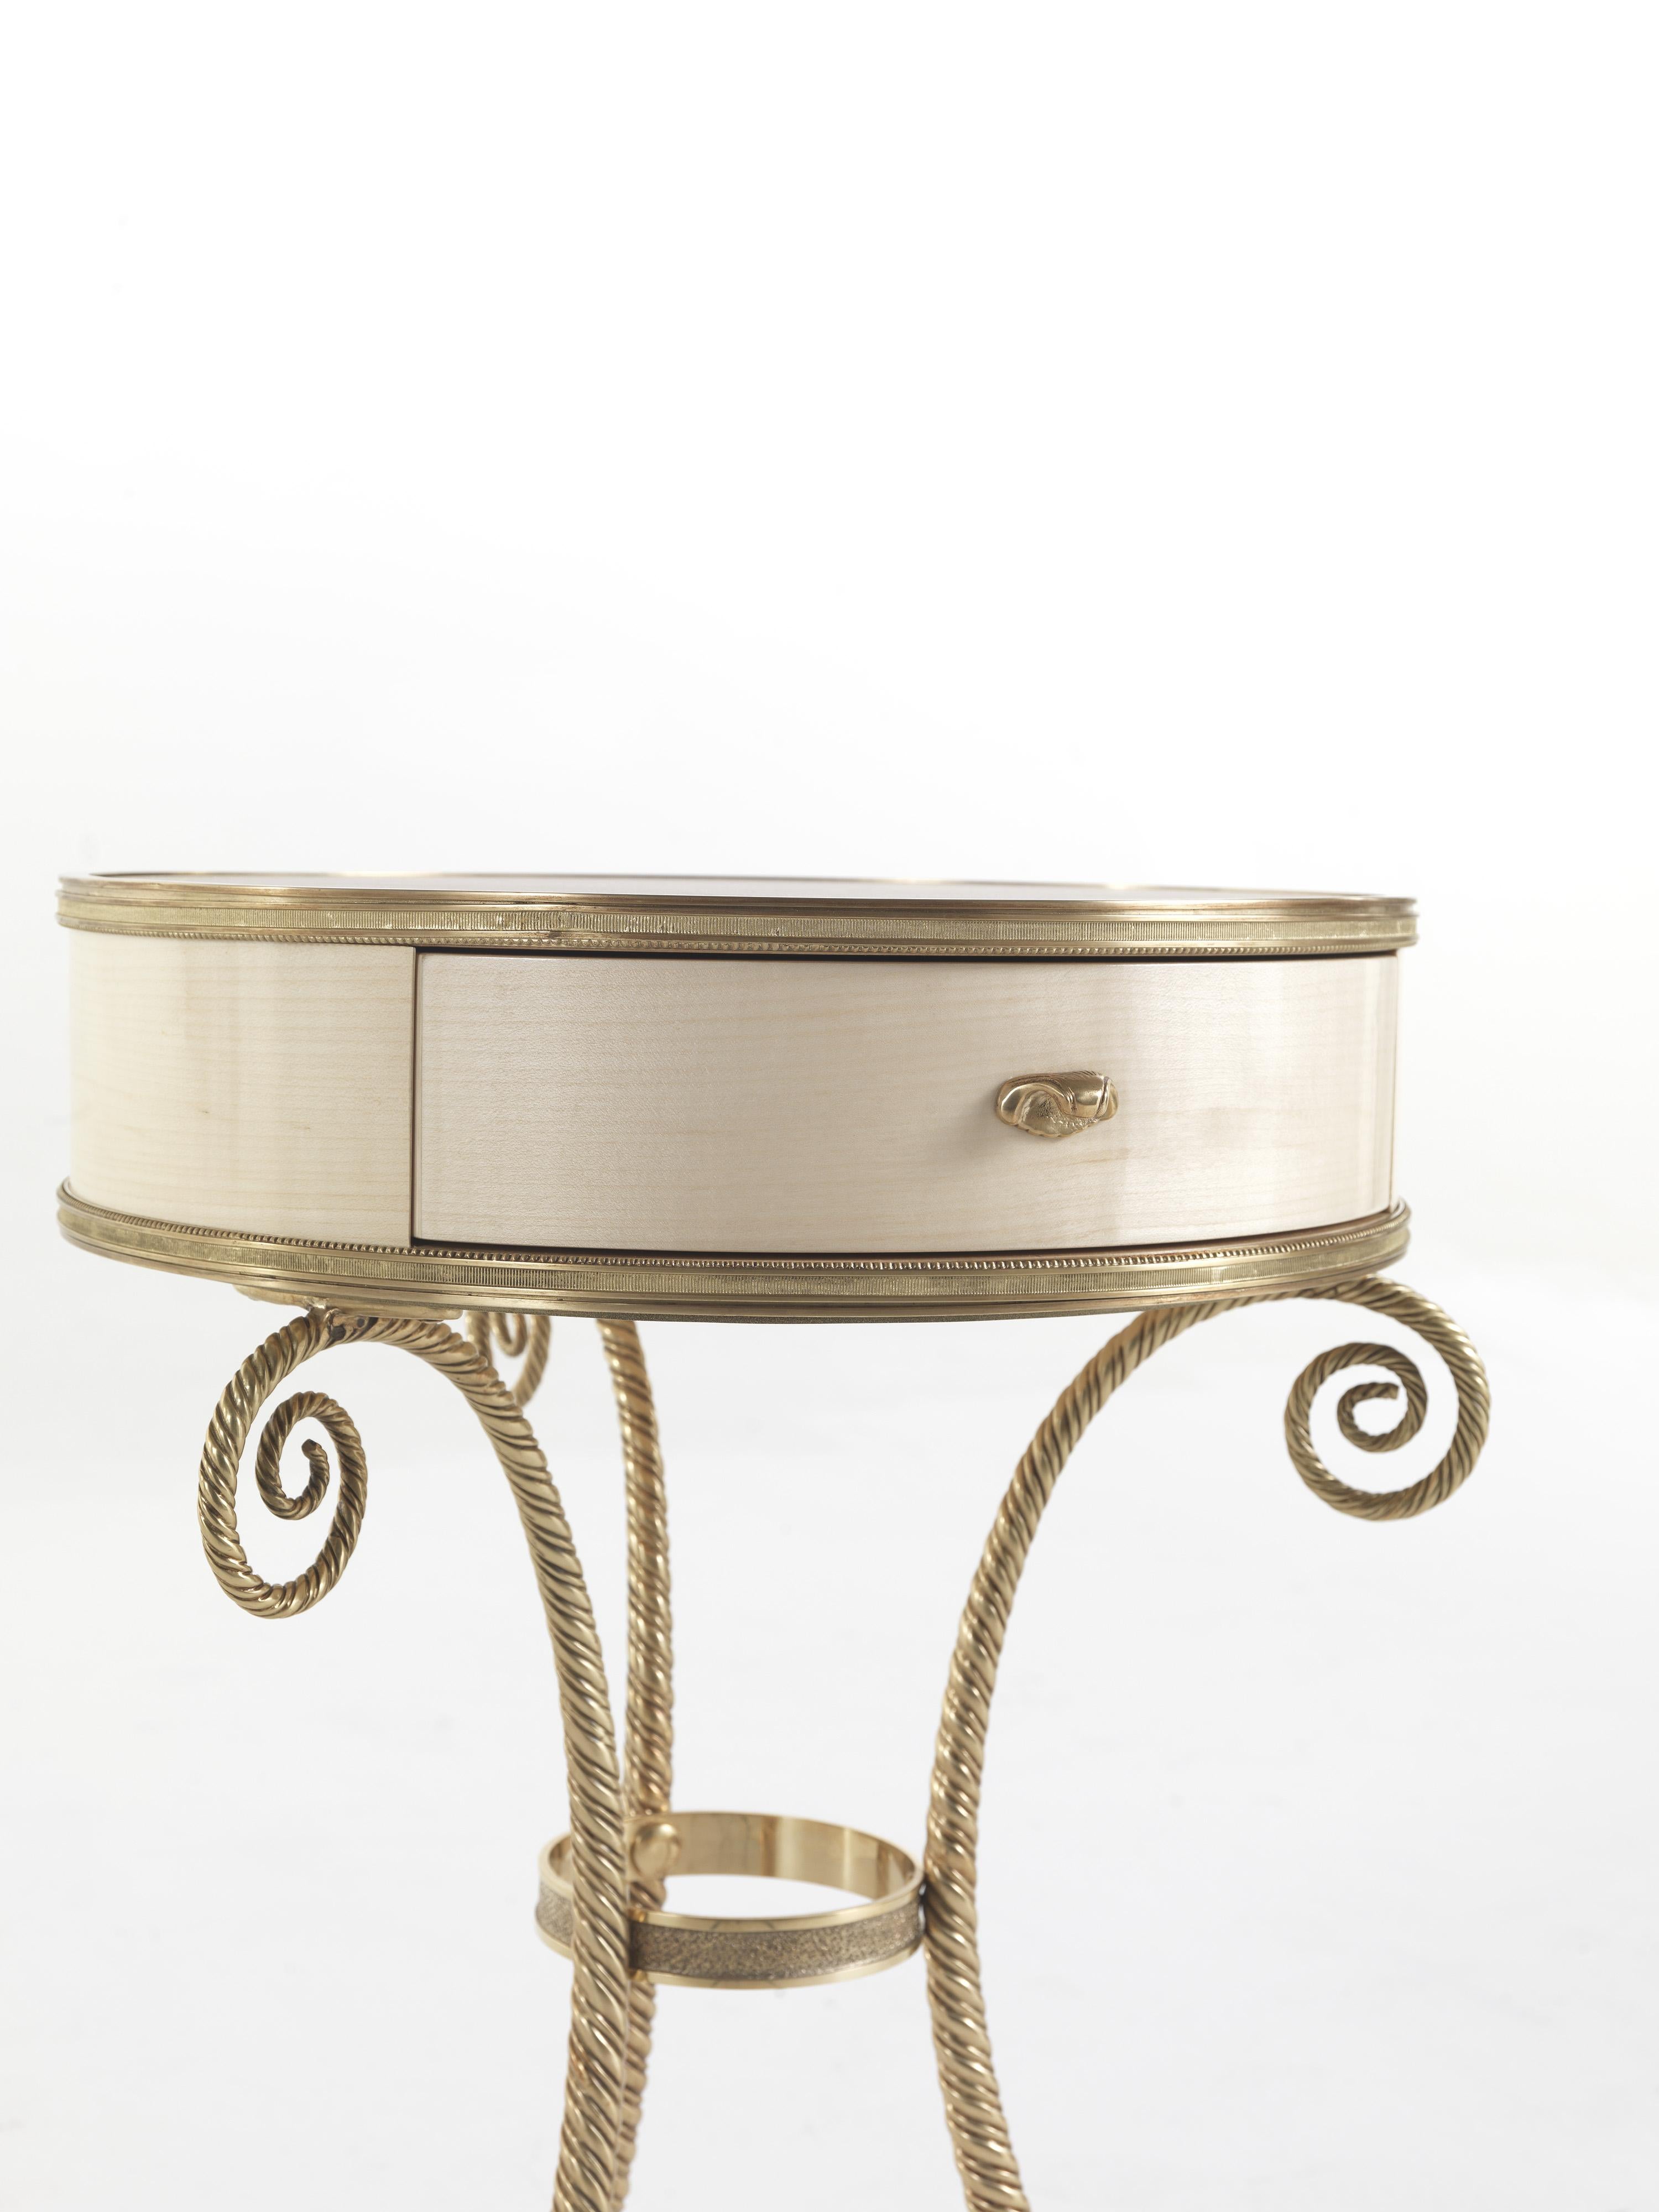 Elegant and graceful, Torchon is a Louis XIV-style night table, with a base in brass, maple structure and a top in decorated leather. A perfect support base for lamps, books and magazines, it enhances the setting with style and delicacy.
Torchon